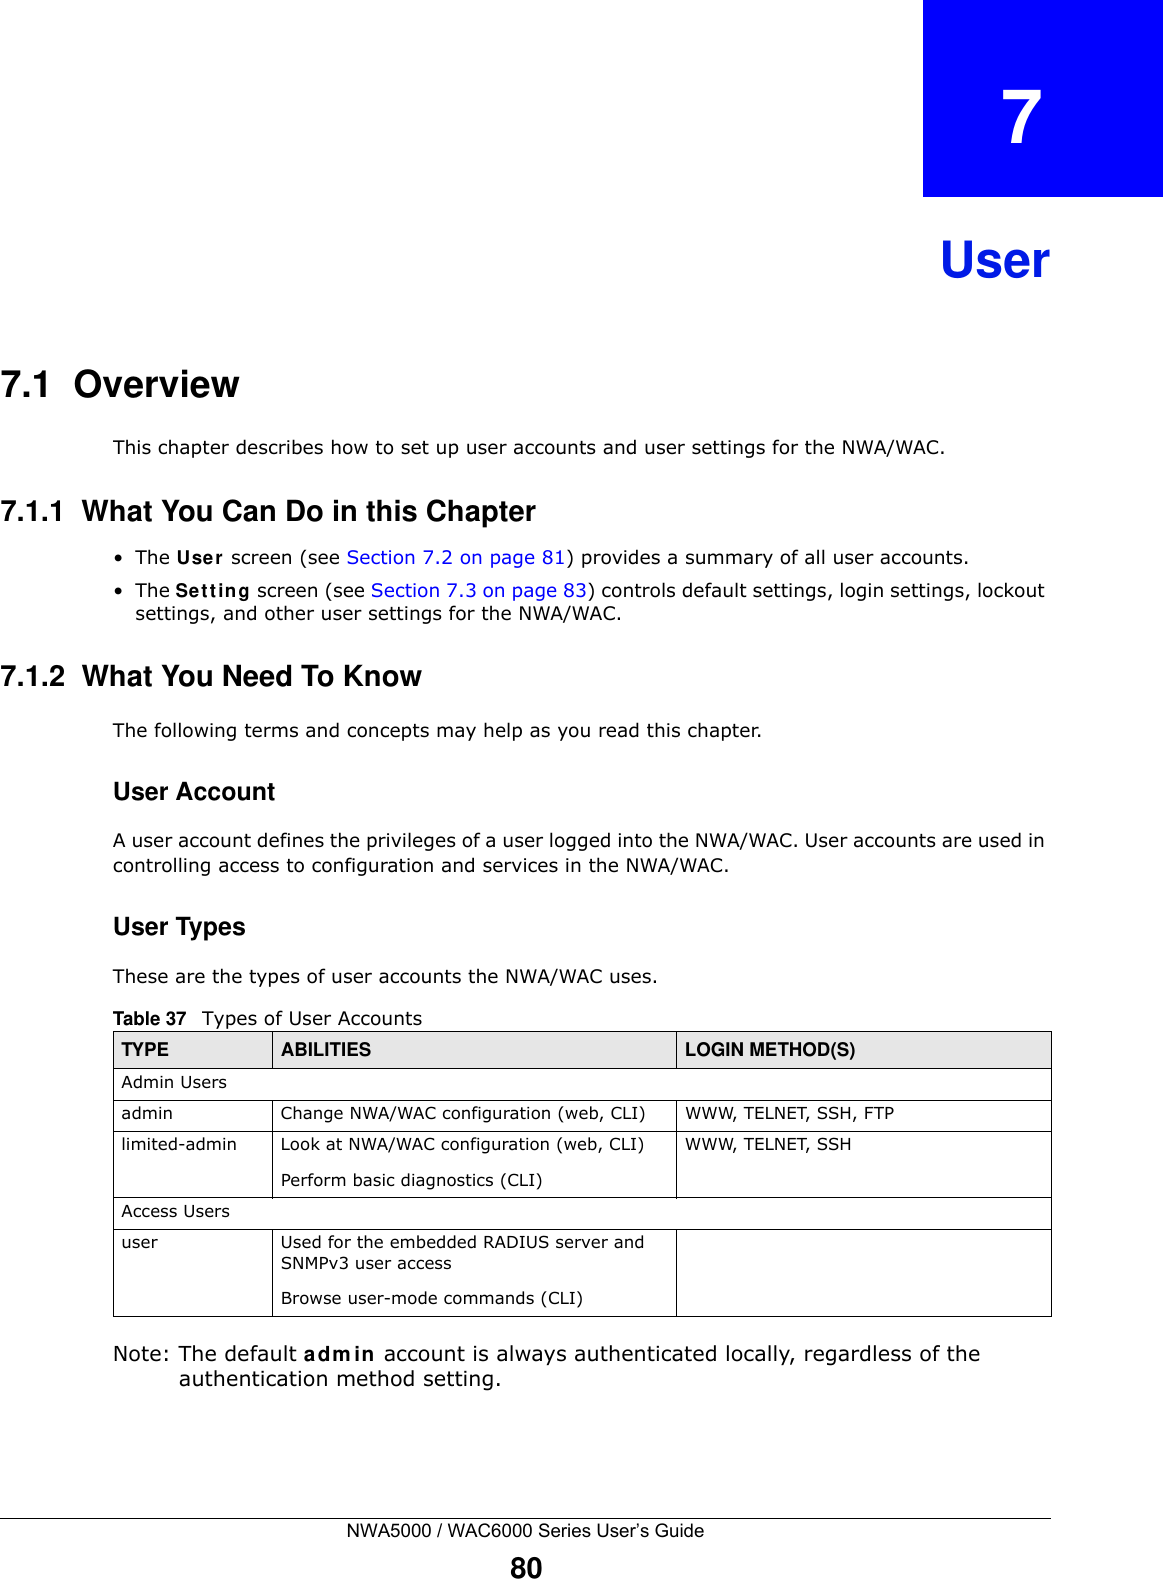 NWA5000 / WAC6000 Series User’s Guide80CHAPTER   7User7.1  OverviewThis chapter describes how to set up user accounts and user settings for the NWA/WAC. 7.1.1  What You Can Do in this Chapter•The User screen (see Section 7.2 on page 81) provides a summary of all user accounts.•The Setting screen (see Section 7.3 on page 83) controls default settings, login settings, lockout settings, and other user settings for the NWA/WAC. 7.1.2  What You Need To KnowThe following terms and concepts may help as you read this chapter.User AccountA user account defines the privileges of a user logged into the NWA/WAC. User accounts are used in controlling access to configuration and services in the NWA/WAC.User TypesThese are the types of user accounts the NWA/WAC uses.  Note: The default admin account is always authenticated locally, regardless of the authentication method setting.Table 37   Types of User AccountsTYPE ABILITIES LOGIN METHOD(S)Admin Usersadmin Change NWA/WAC configuration (web, CLI) WWW, TELNET, SSH, FTPlimited-admin Look at NWA/WAC configuration (web, CLI)Perform basic diagnostics (CLI)WWW, TELNET, SSHAccess Usersuser Used for the embedded RADIUS server and SNMPv3 user accessBrowse user-mode commands (CLI)